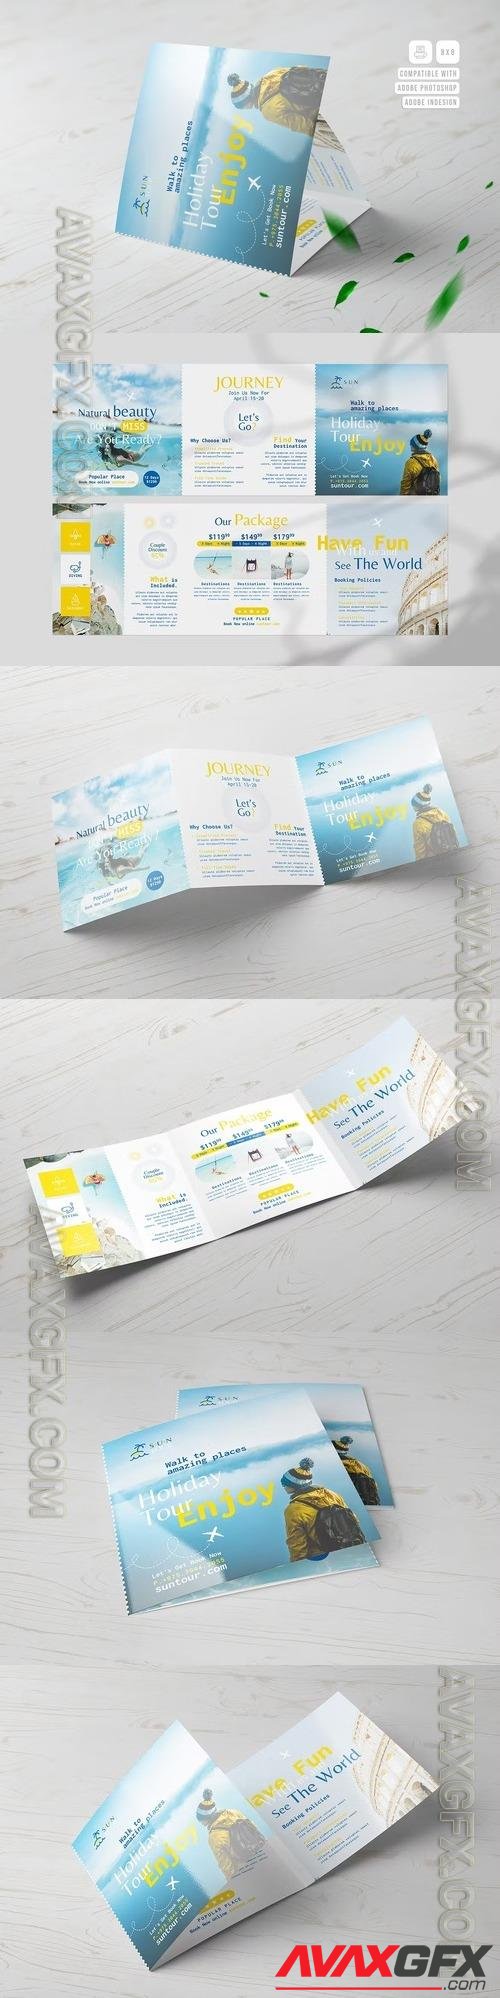 Travel Agency Square Trifold Brochure TCMBVVE